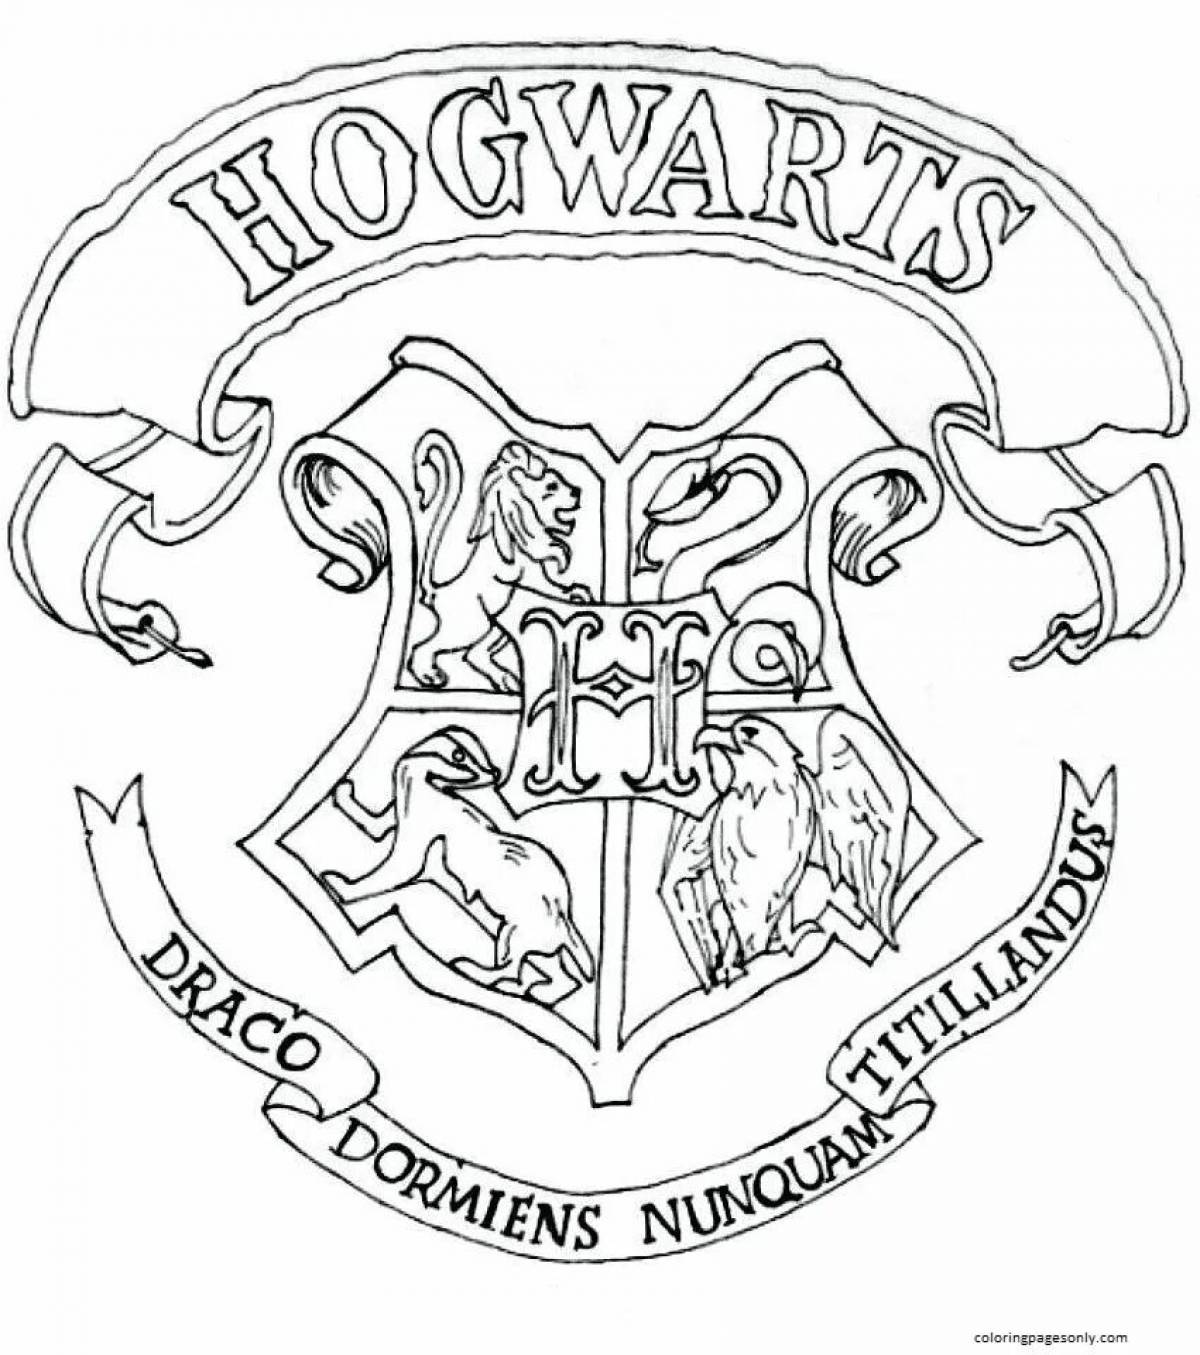 Colorfully detailed Hogwarts houses coloring book